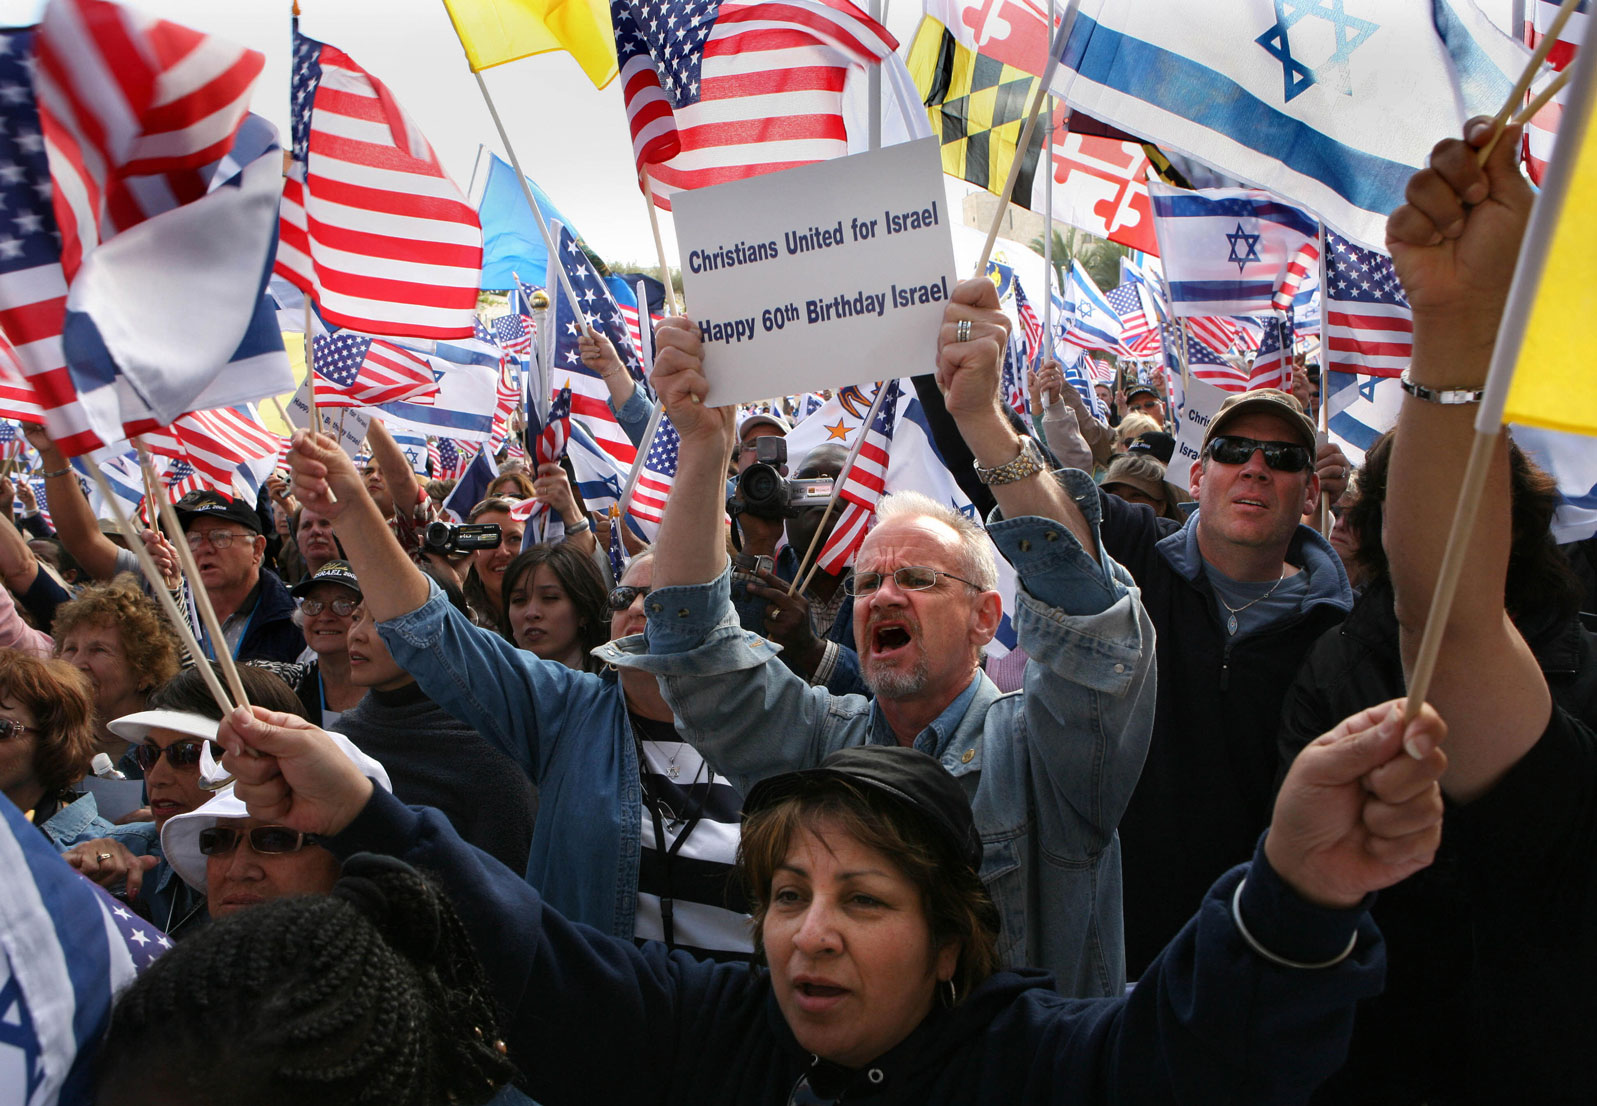 Israel’s Current Crisis Exposes Christian Zionism’s Contradictory Ideals